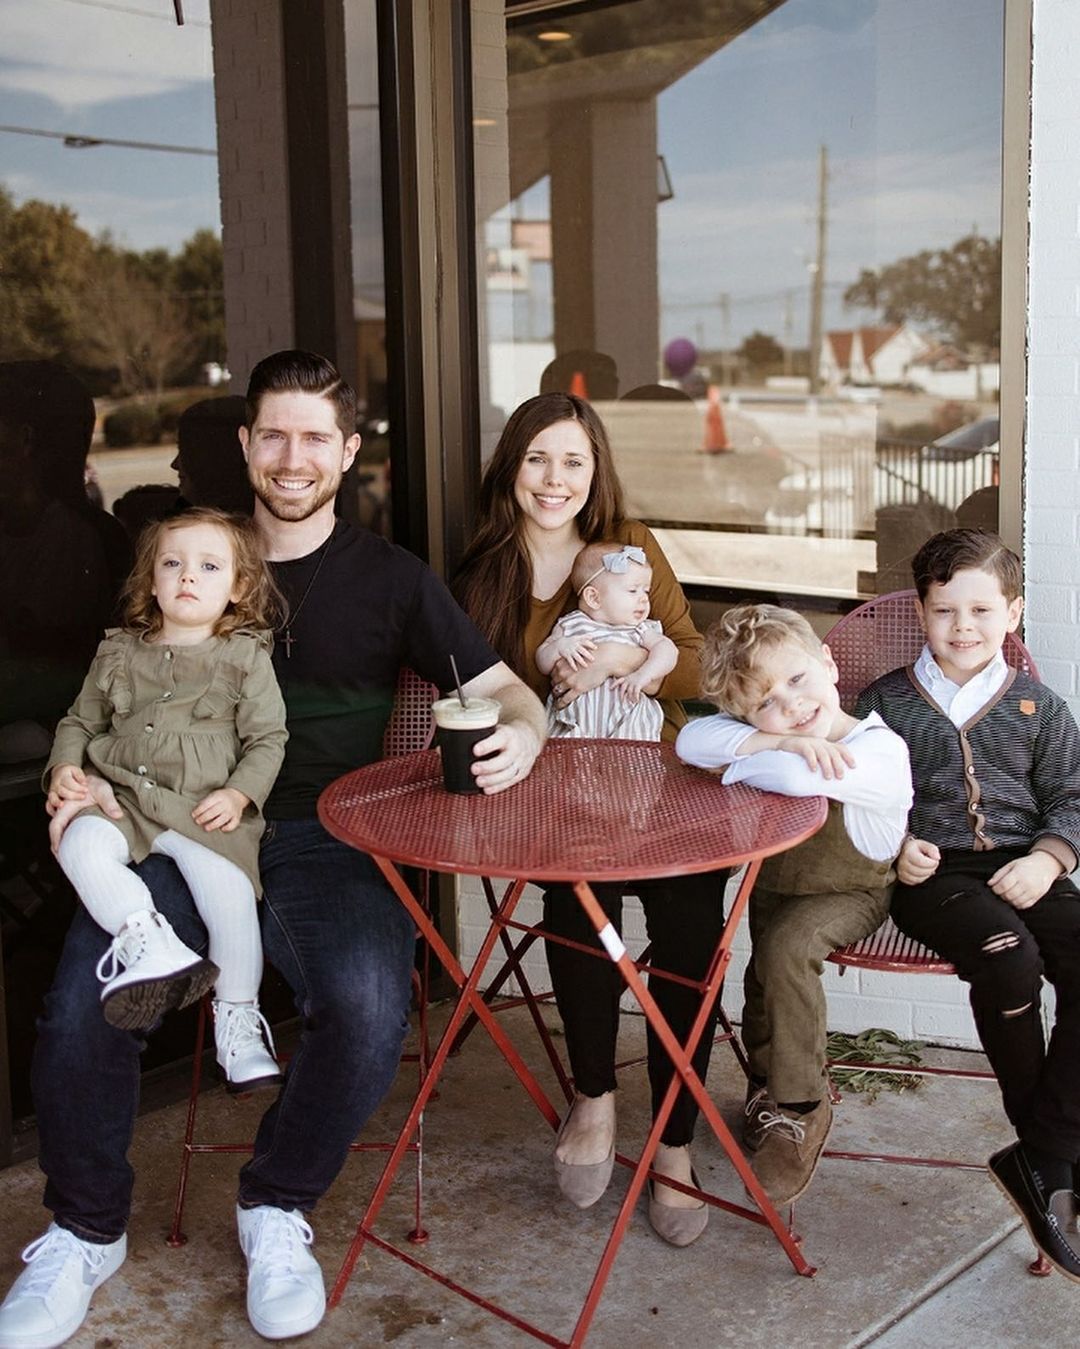 Jessa and Ben posed with their four children